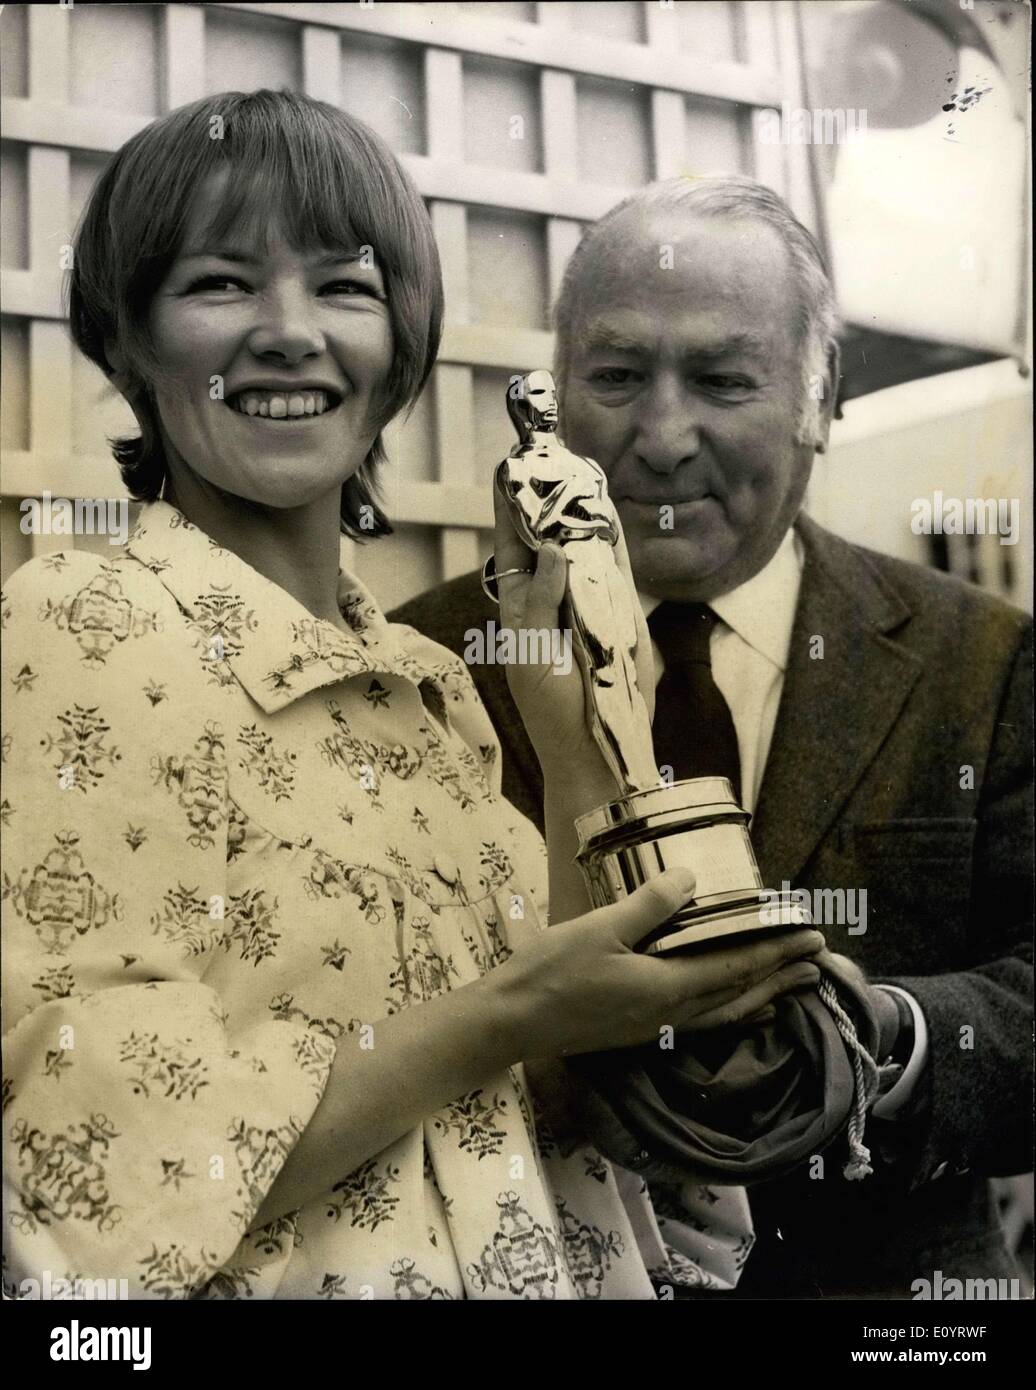 Apr. 27, 1971 - Hal B. Wallis brings Oscar to Glenda Jackson.: Producer Hal B. Wallis, a member of the board of governors of the Motion Picture Academy of Arts and Sciences, today presented to Glenda Jackson on behalf of the Academy the Oscar she was awarded for her performance in ''Women in Love''. Wallis, who arrived in London over the week-end to begin production on his film ''Mary, Queen of Scots'', in which Miss Jackson co-stars with Vanessa Redgrave, brought the Oscar with him from Hollywood. Photo shows Hal. B Stock Photo